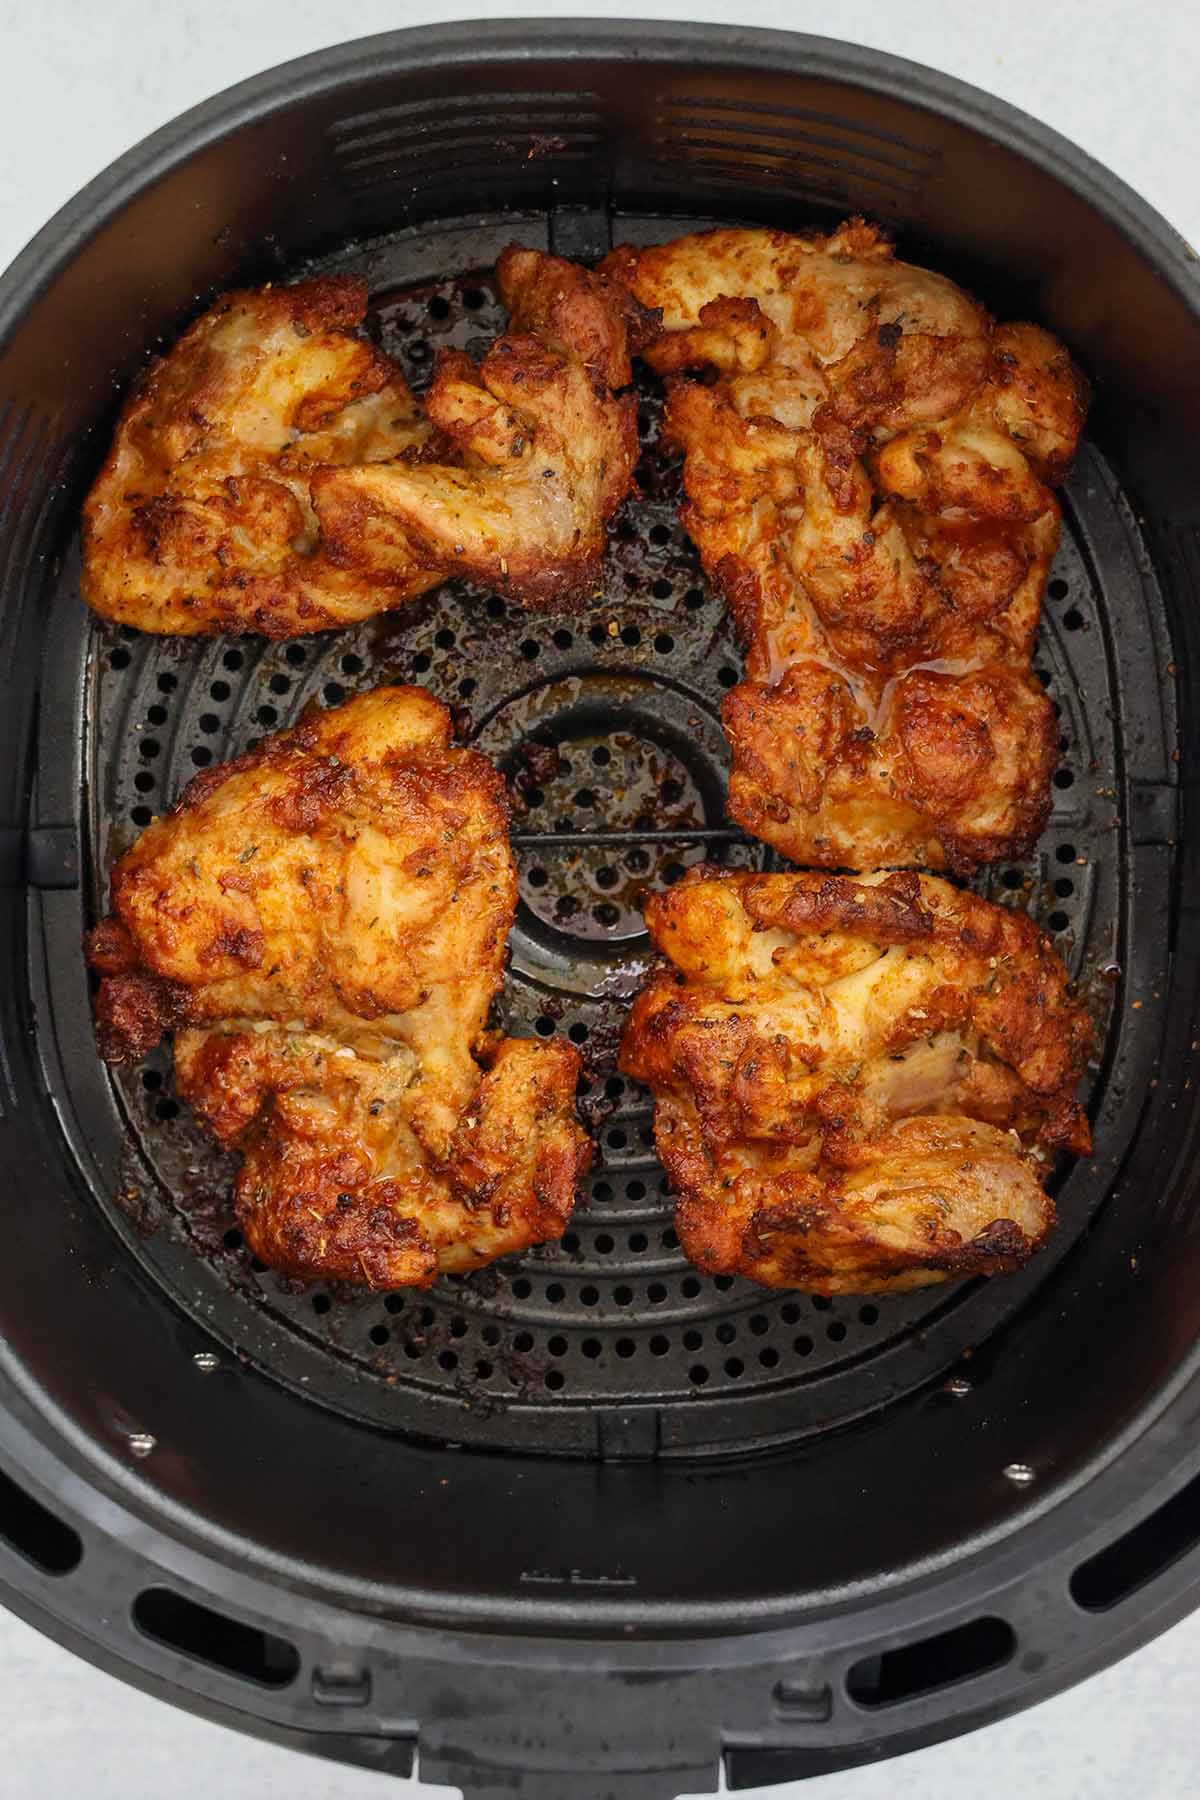 Four cooked boneless chicken thighs in the air fryer basket. 